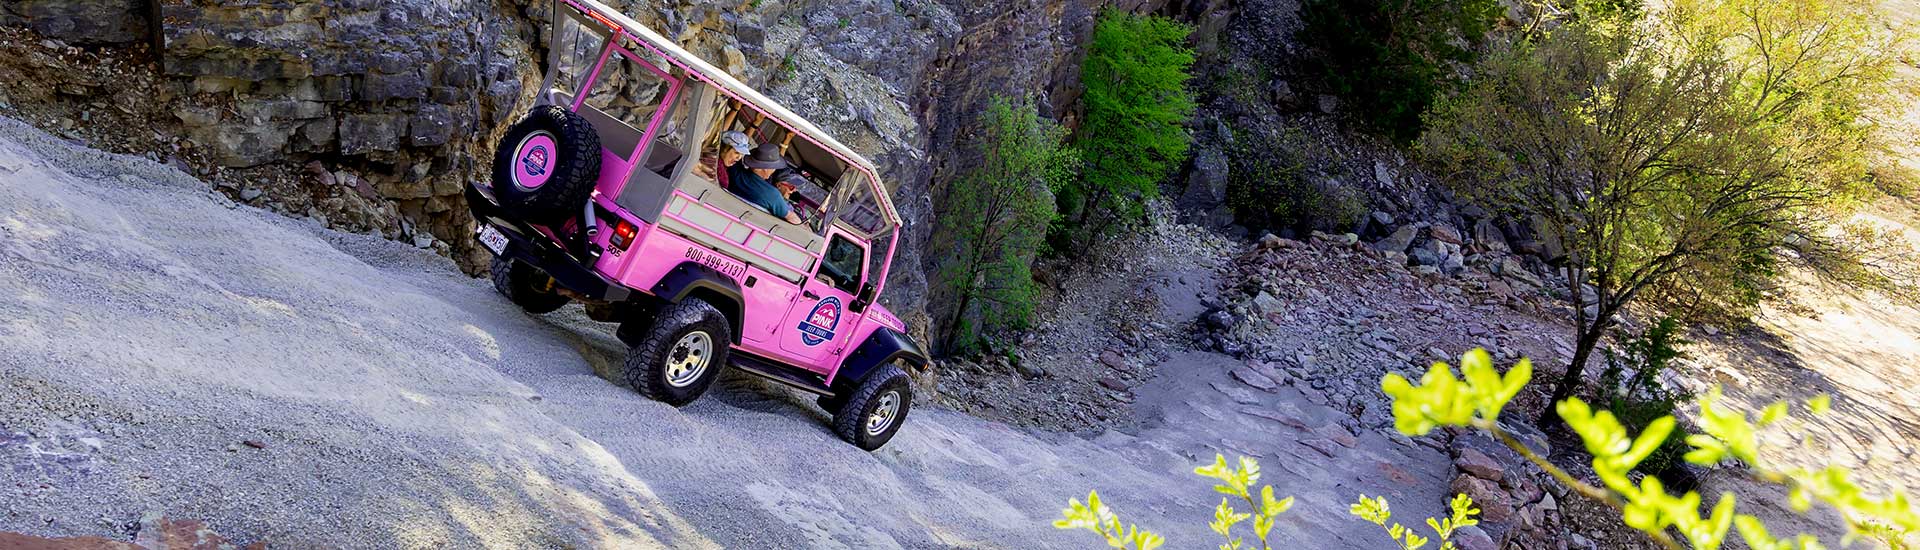 Guests in back of Pink Jeep Wrangler descending steep downhill trail into rock quarry, Ozark Mountains, Branson.